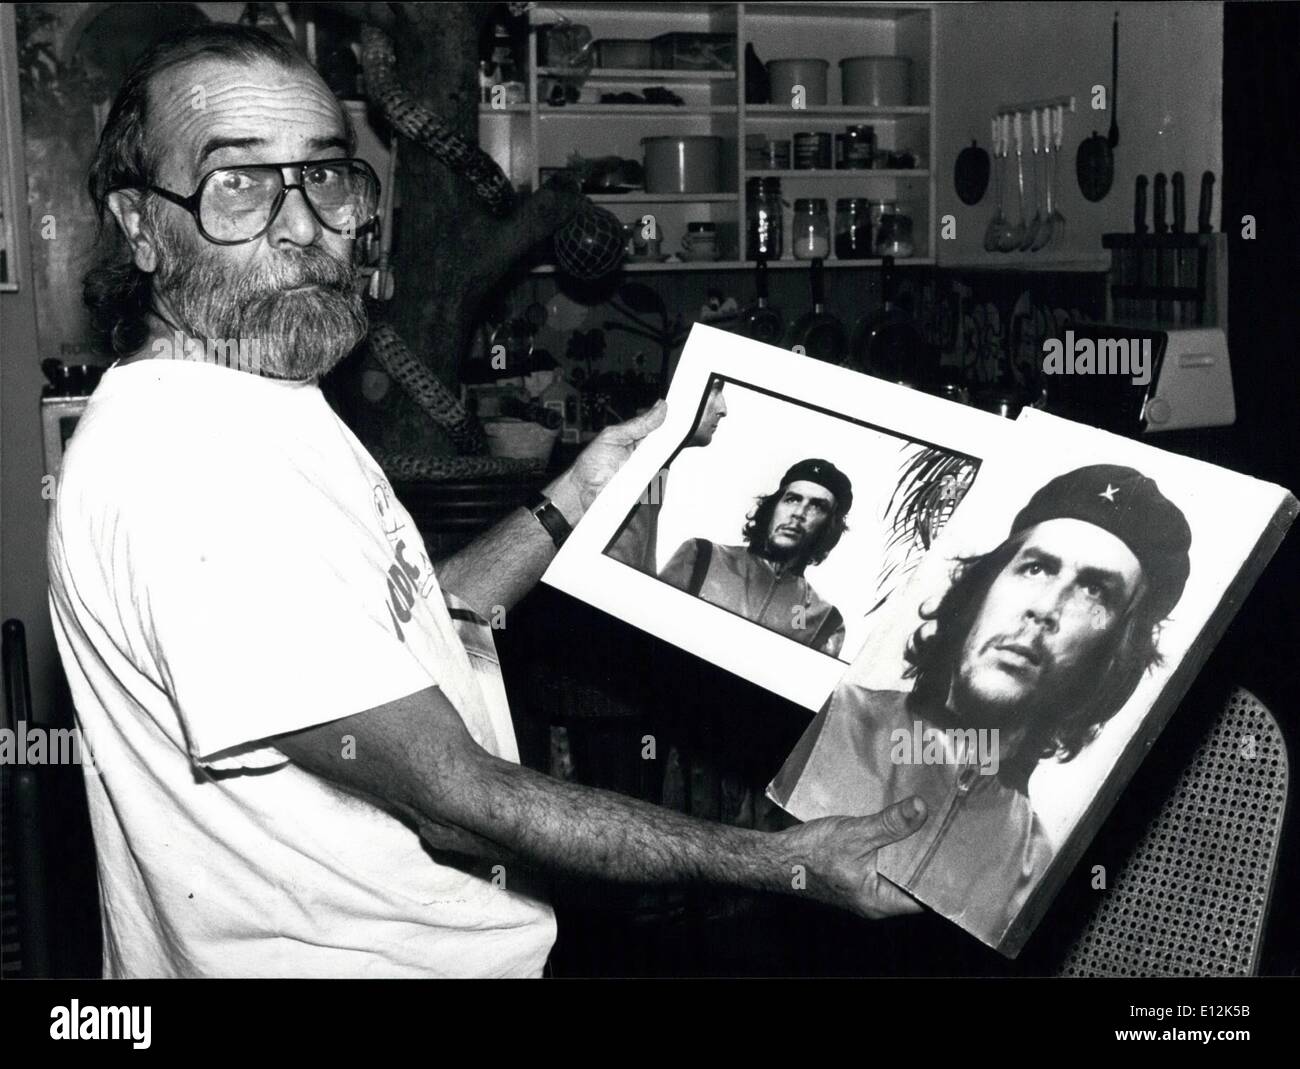 Feb. 24, 2012 - Che: The portrait and its photographer. On the 6th of March 1960, Alberto Korda, a young Cuban photographer, shot a picture that in the meantime has become world-famous, the portrait of Che Guevara. He got the revolutionary on his film while taking pictures during obsequies for the victims of an accident in Havana. Albert Korba shows the original and the portrait of the picture that made its way around the world. 23/01/89 Stock Photo